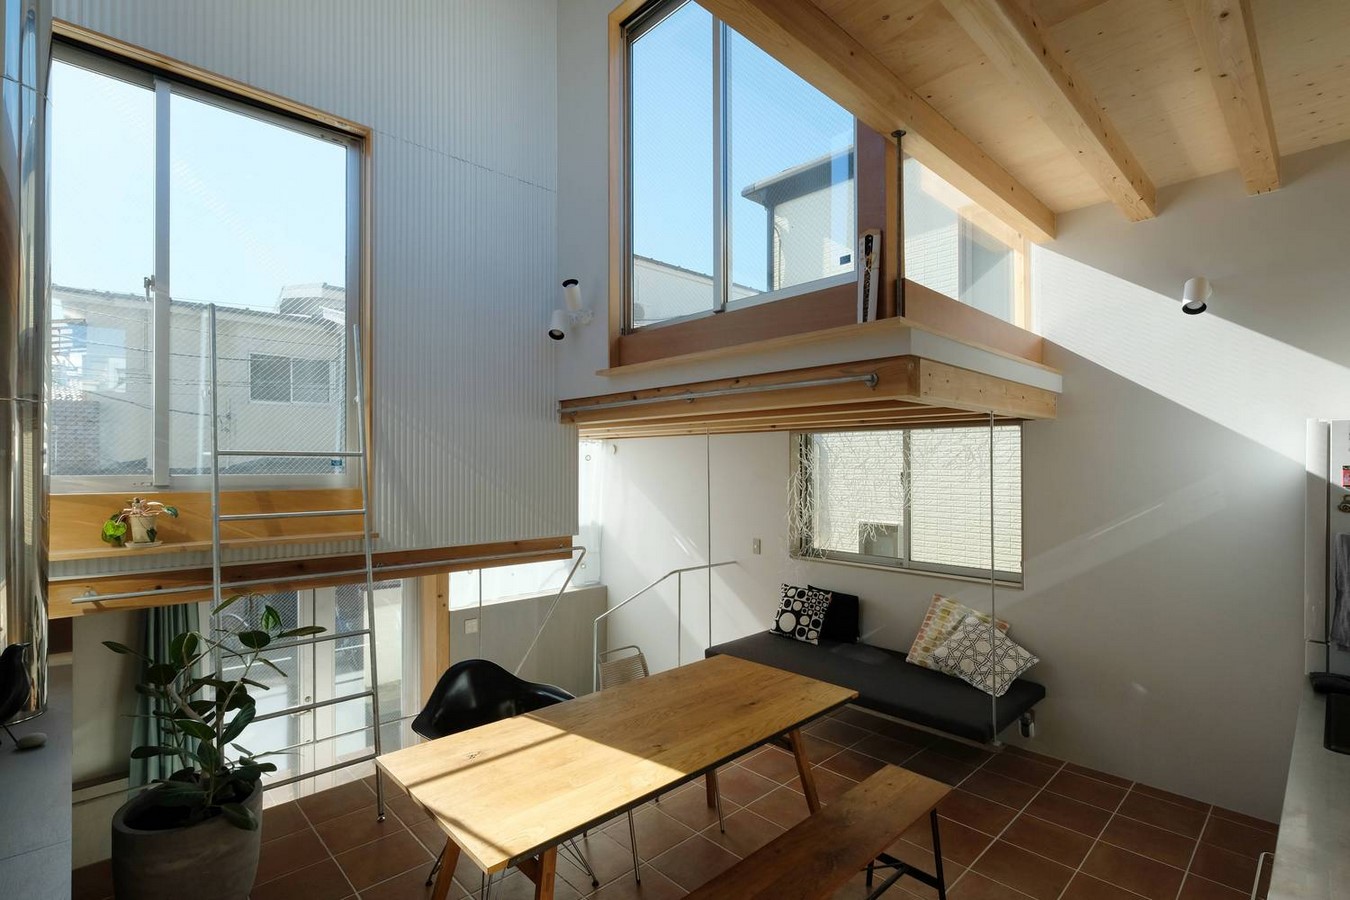 15 Japanese Small Houses That Are Beautifully Designed - Sheet233